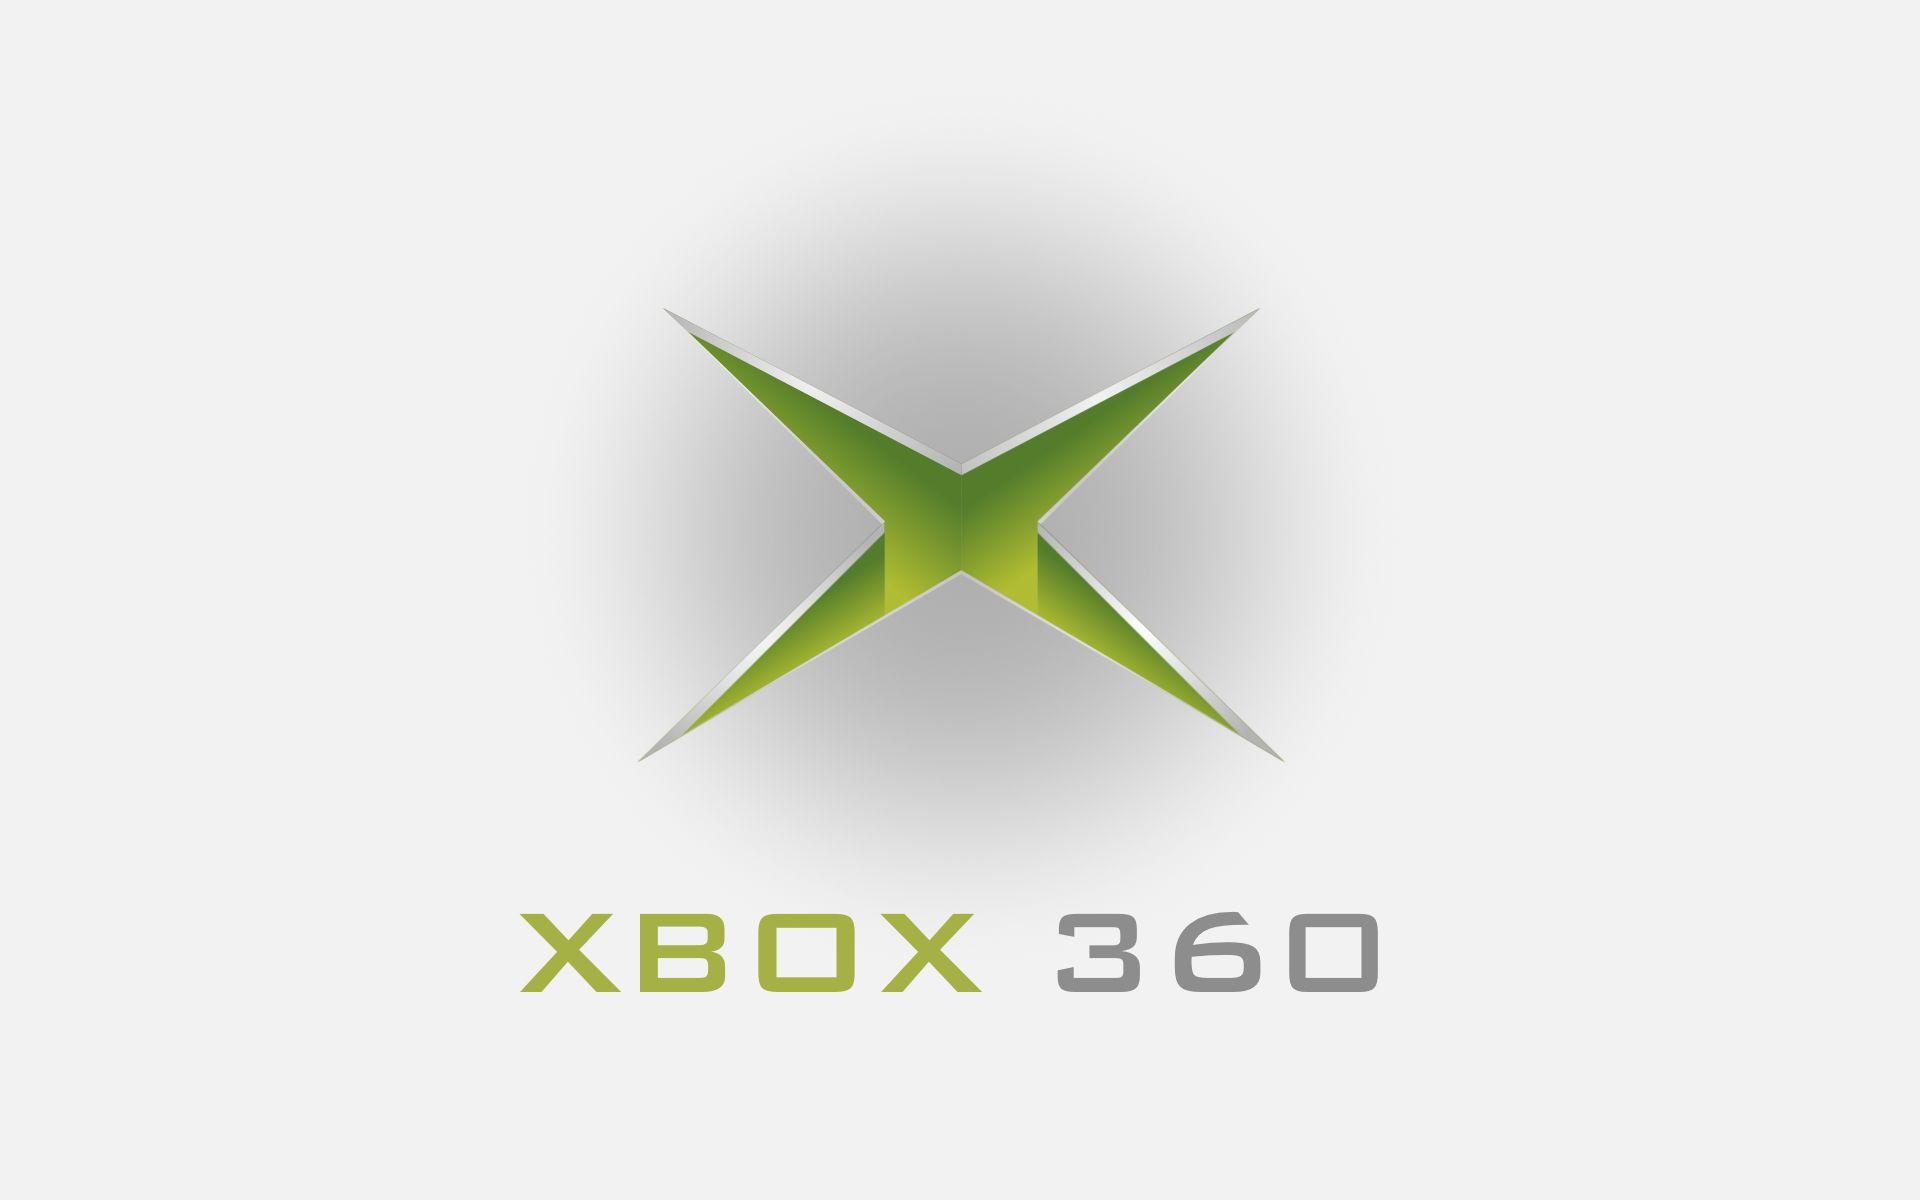 First Xbox Logo - Why This Nintendo Fanboy is Tempted to Buy an Xbox 360